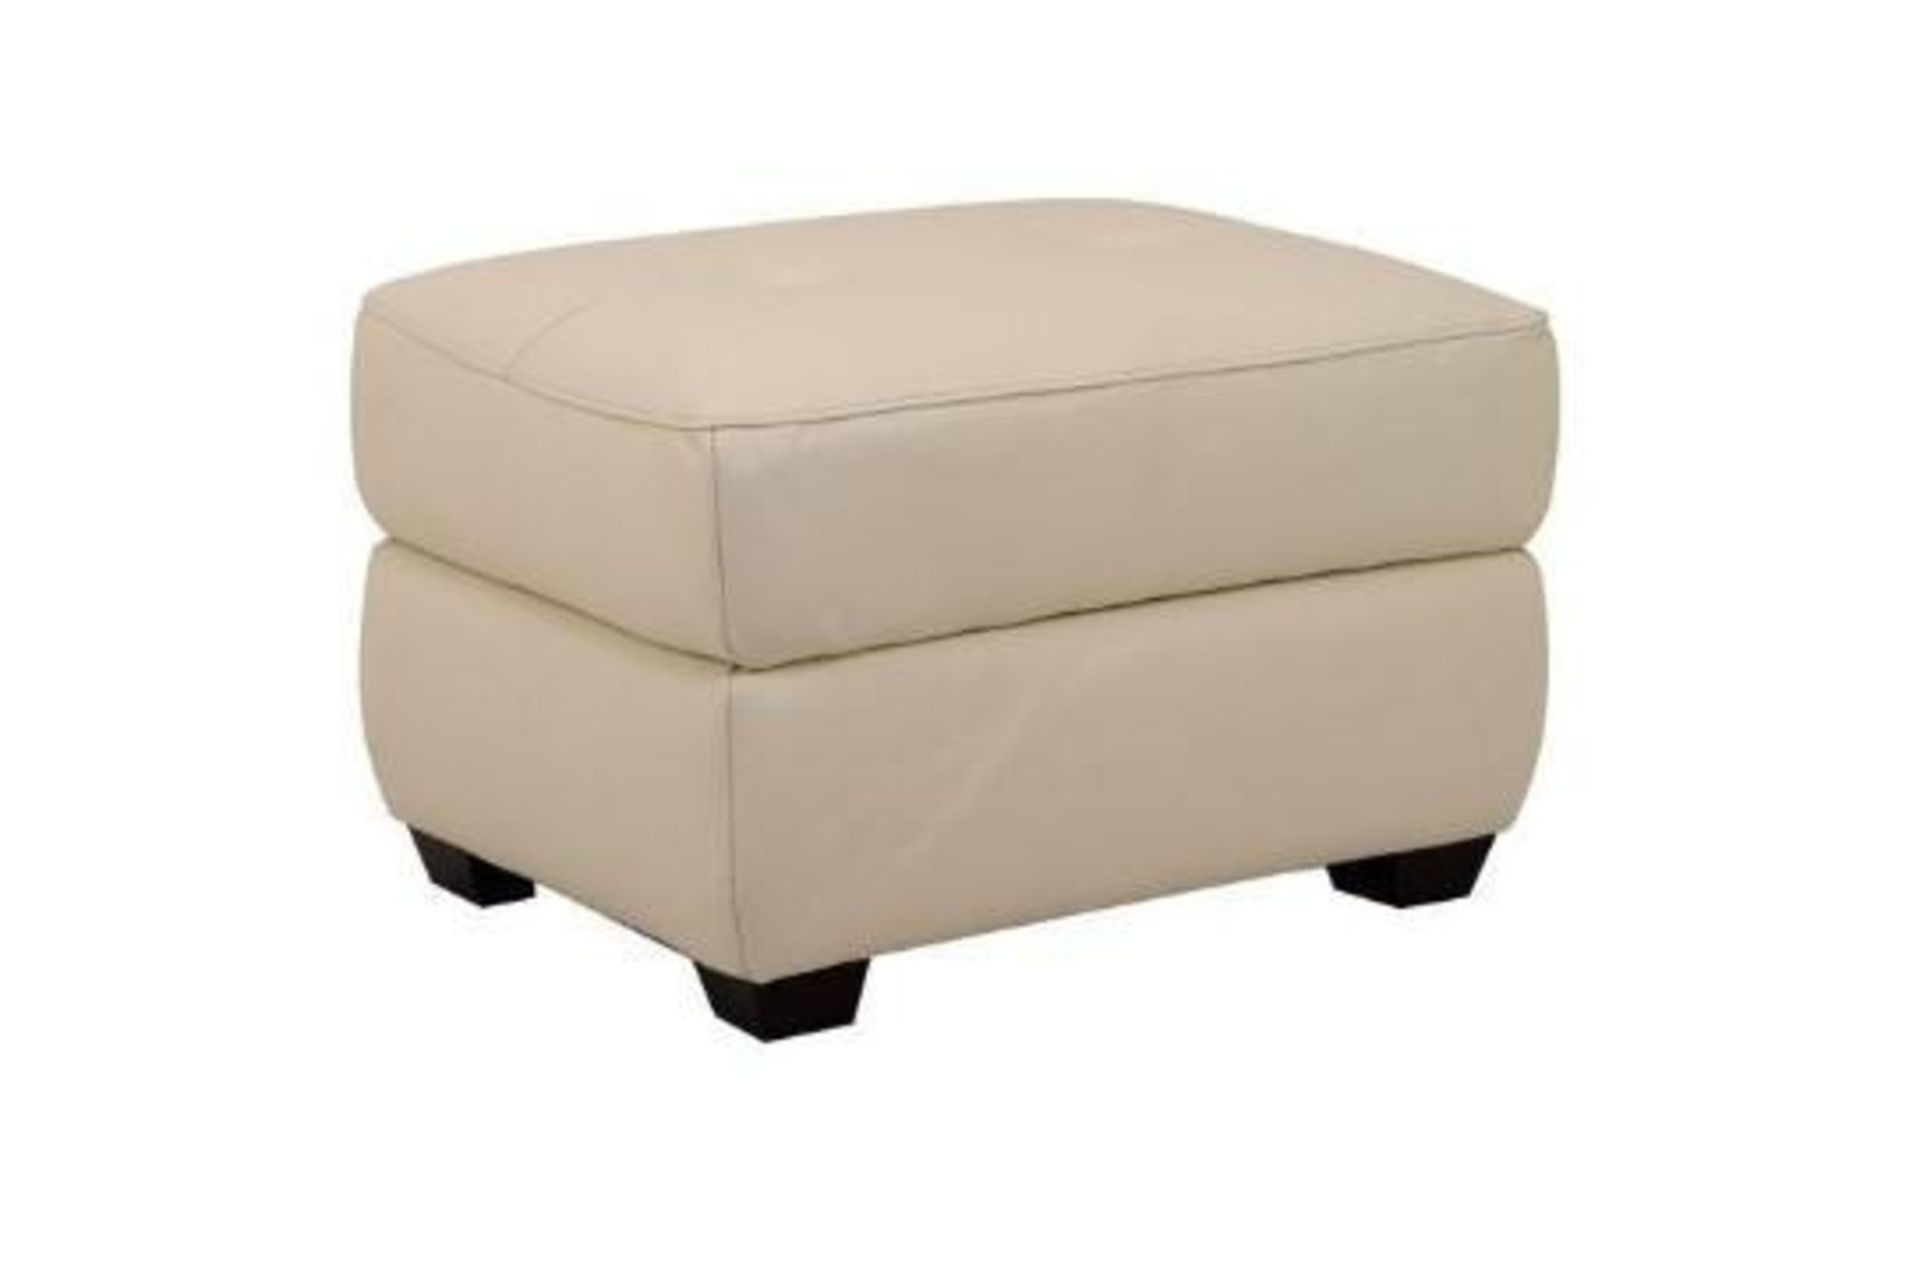 Brand new and boxed SCS Fallon leather storage footstool in Cream.